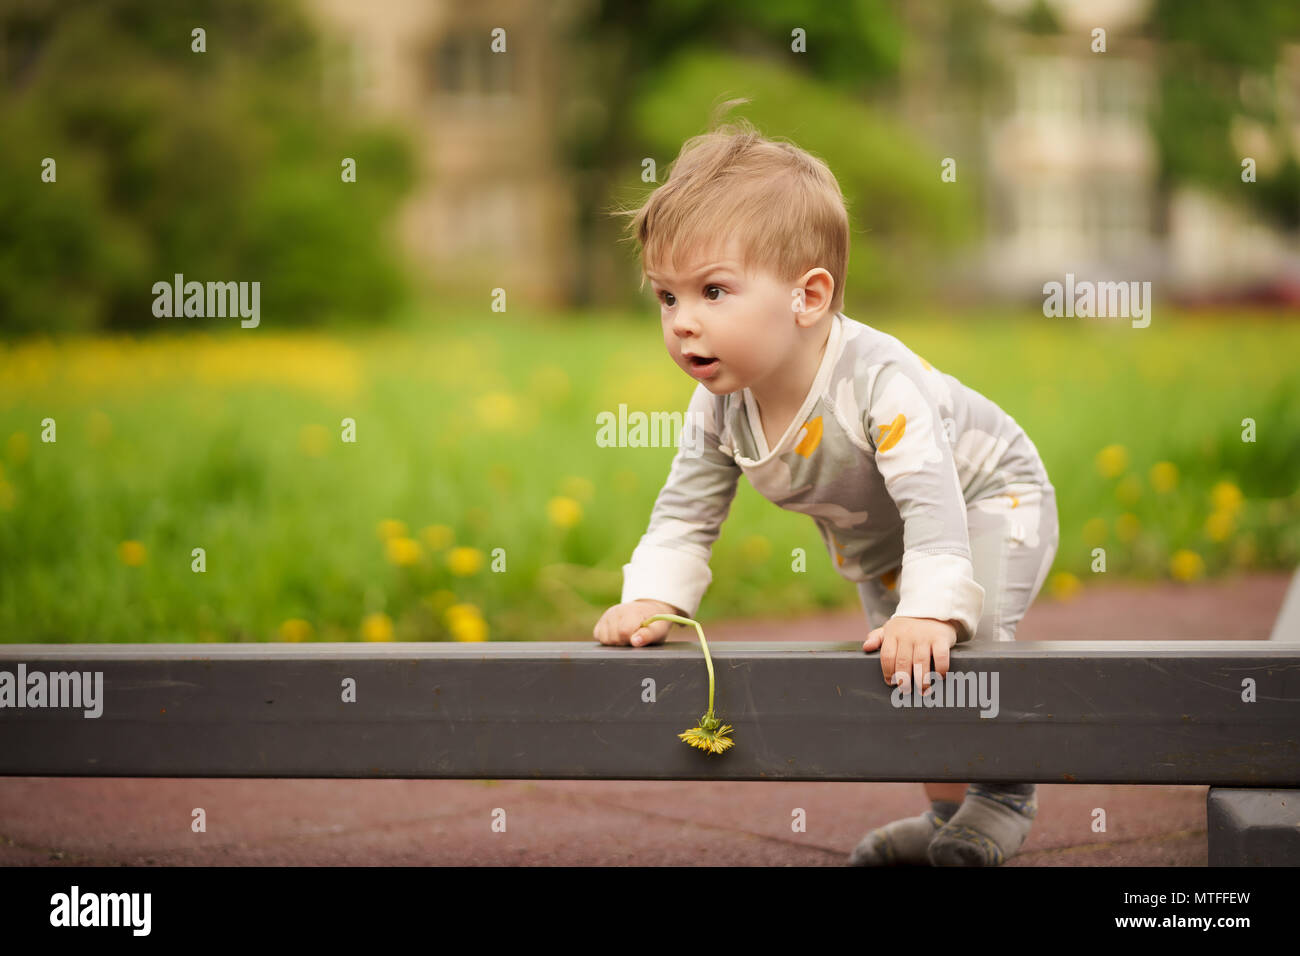 Concept: family values. Portrait of adorable innocent funny brown-eyed baby playing at outdoor playground. Stock Photo